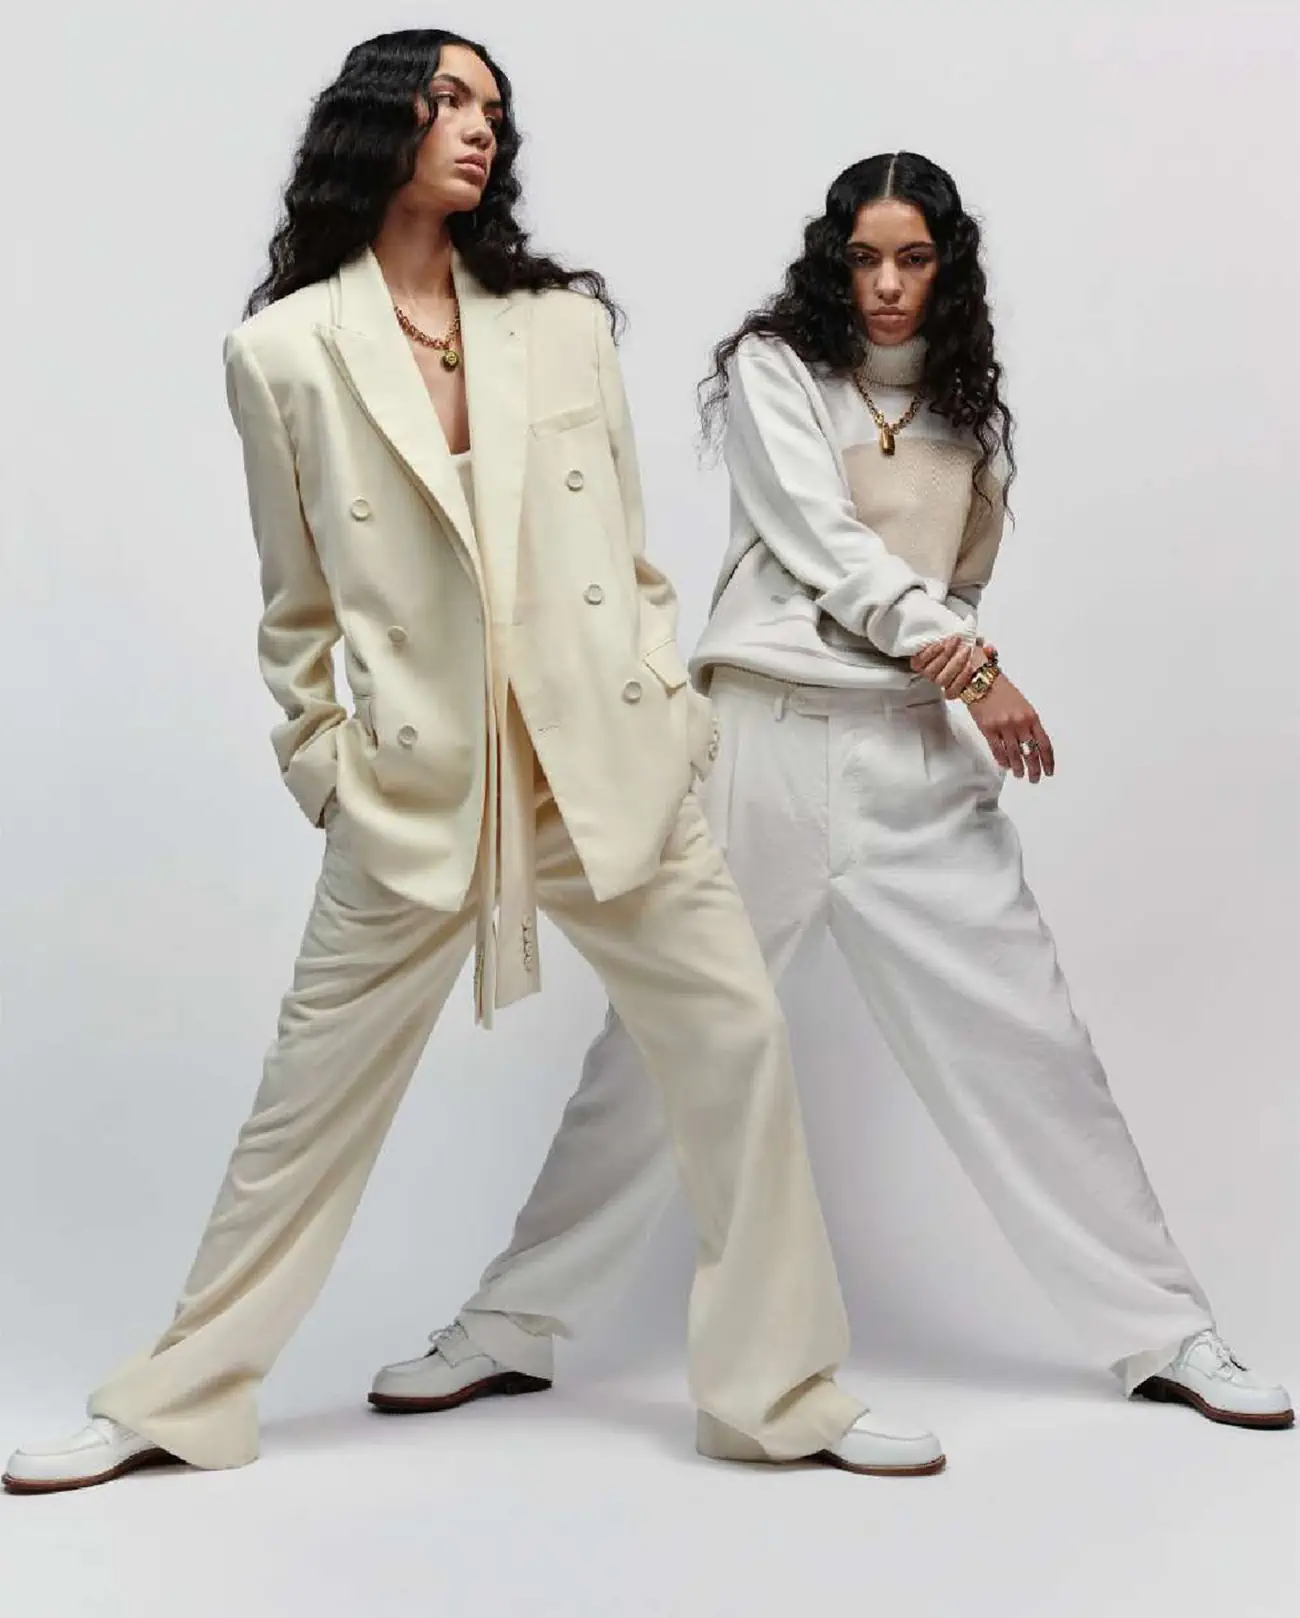 Sadhbh and Cadhla O’Reilly by Ekua King for Elle France April 13th, 2023